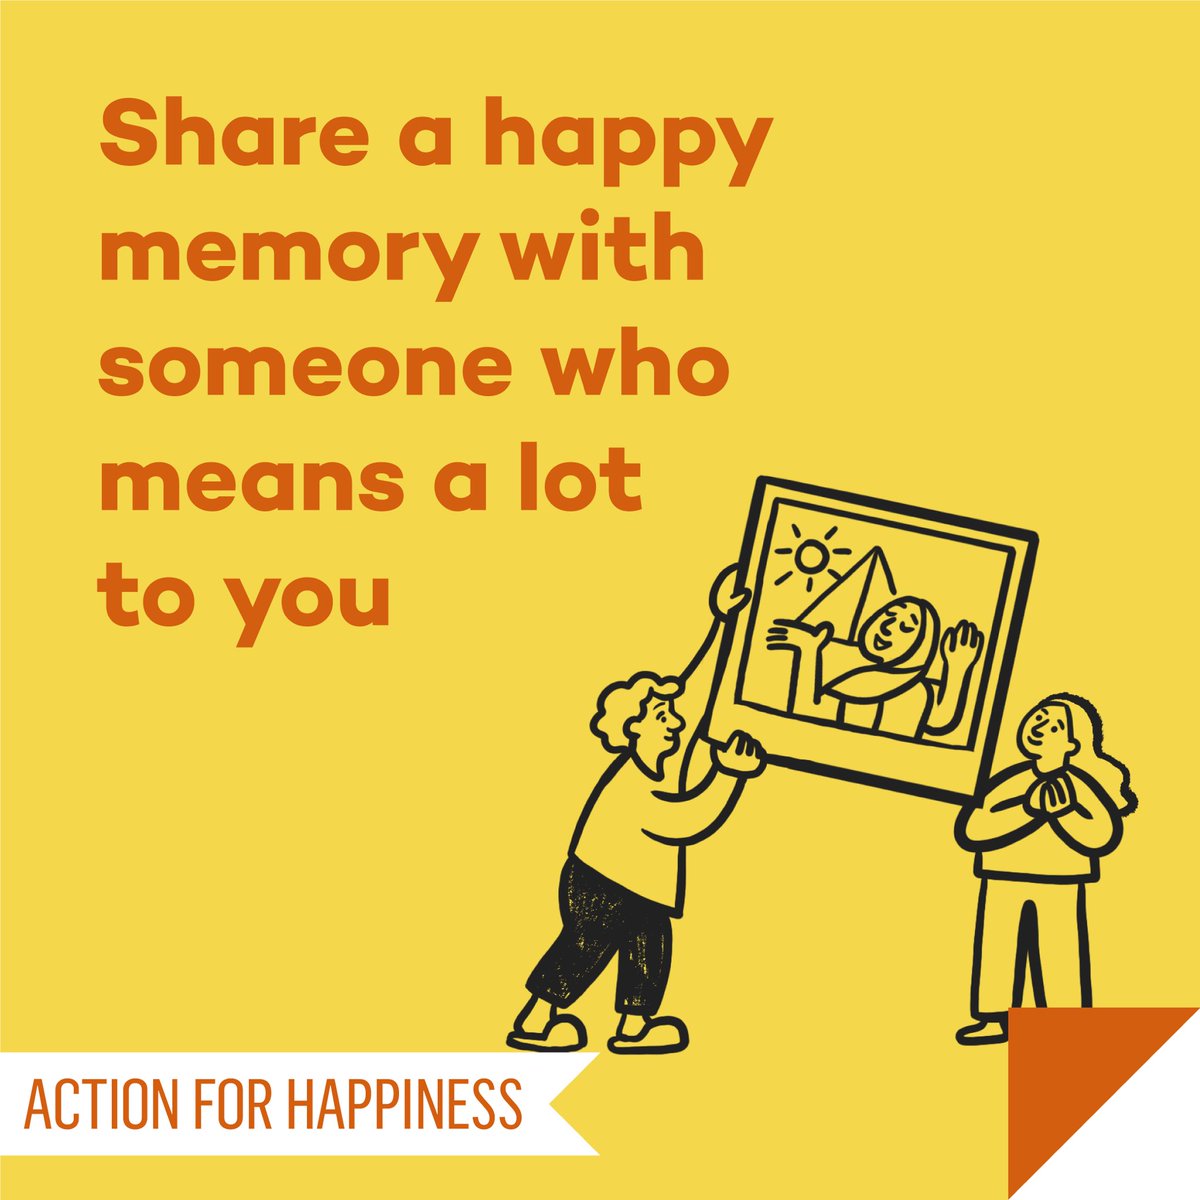 Joyful June - Day 14: Share a happy memory with someone who means a lot to you actionforhappiness.org/joyful-june #JoyfulJune